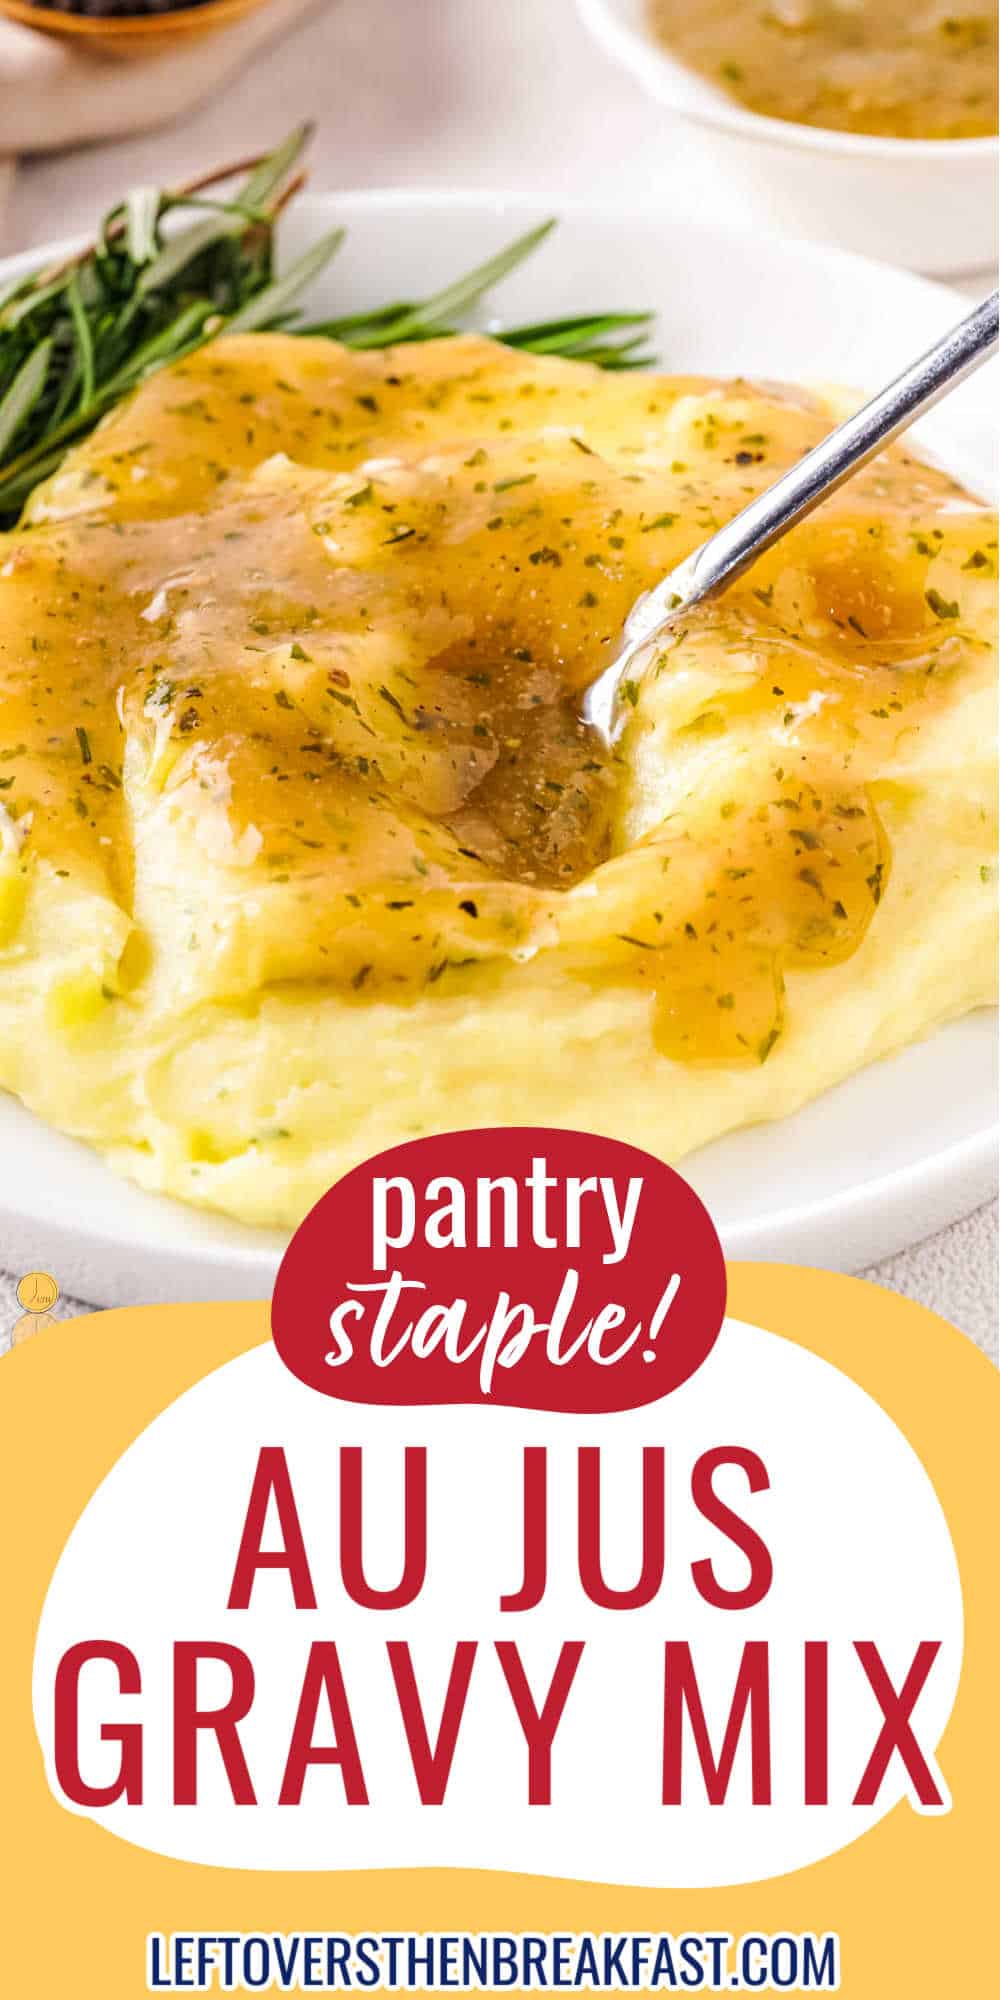 gravy on mashed potatoes with a yellow banner and red text